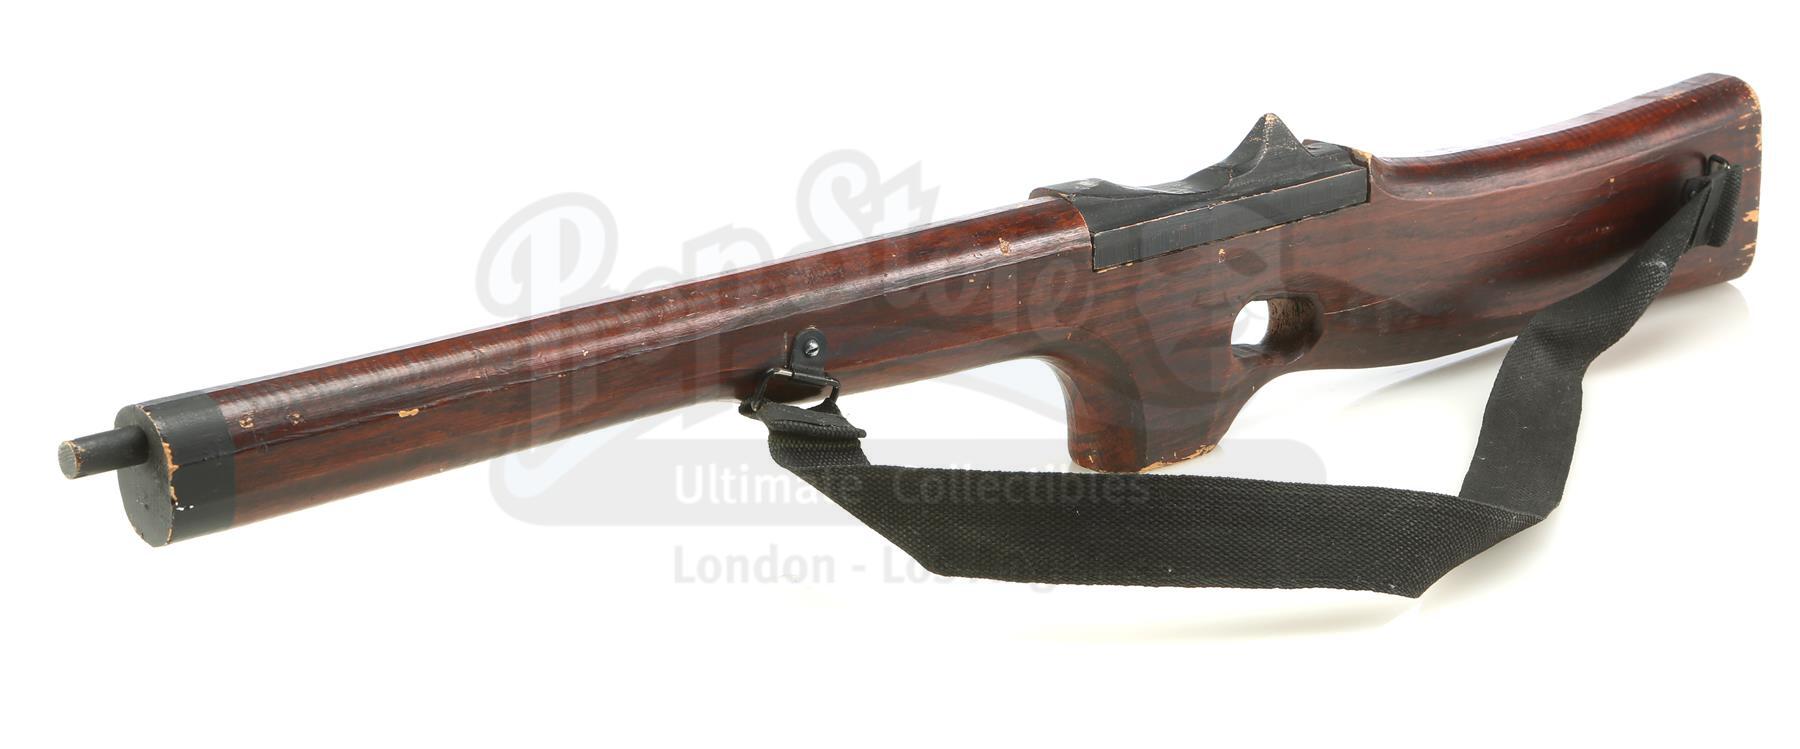 Lot #526 - PLANET OF THE APES (1968) - Ape Rifle - Image 2 of 3